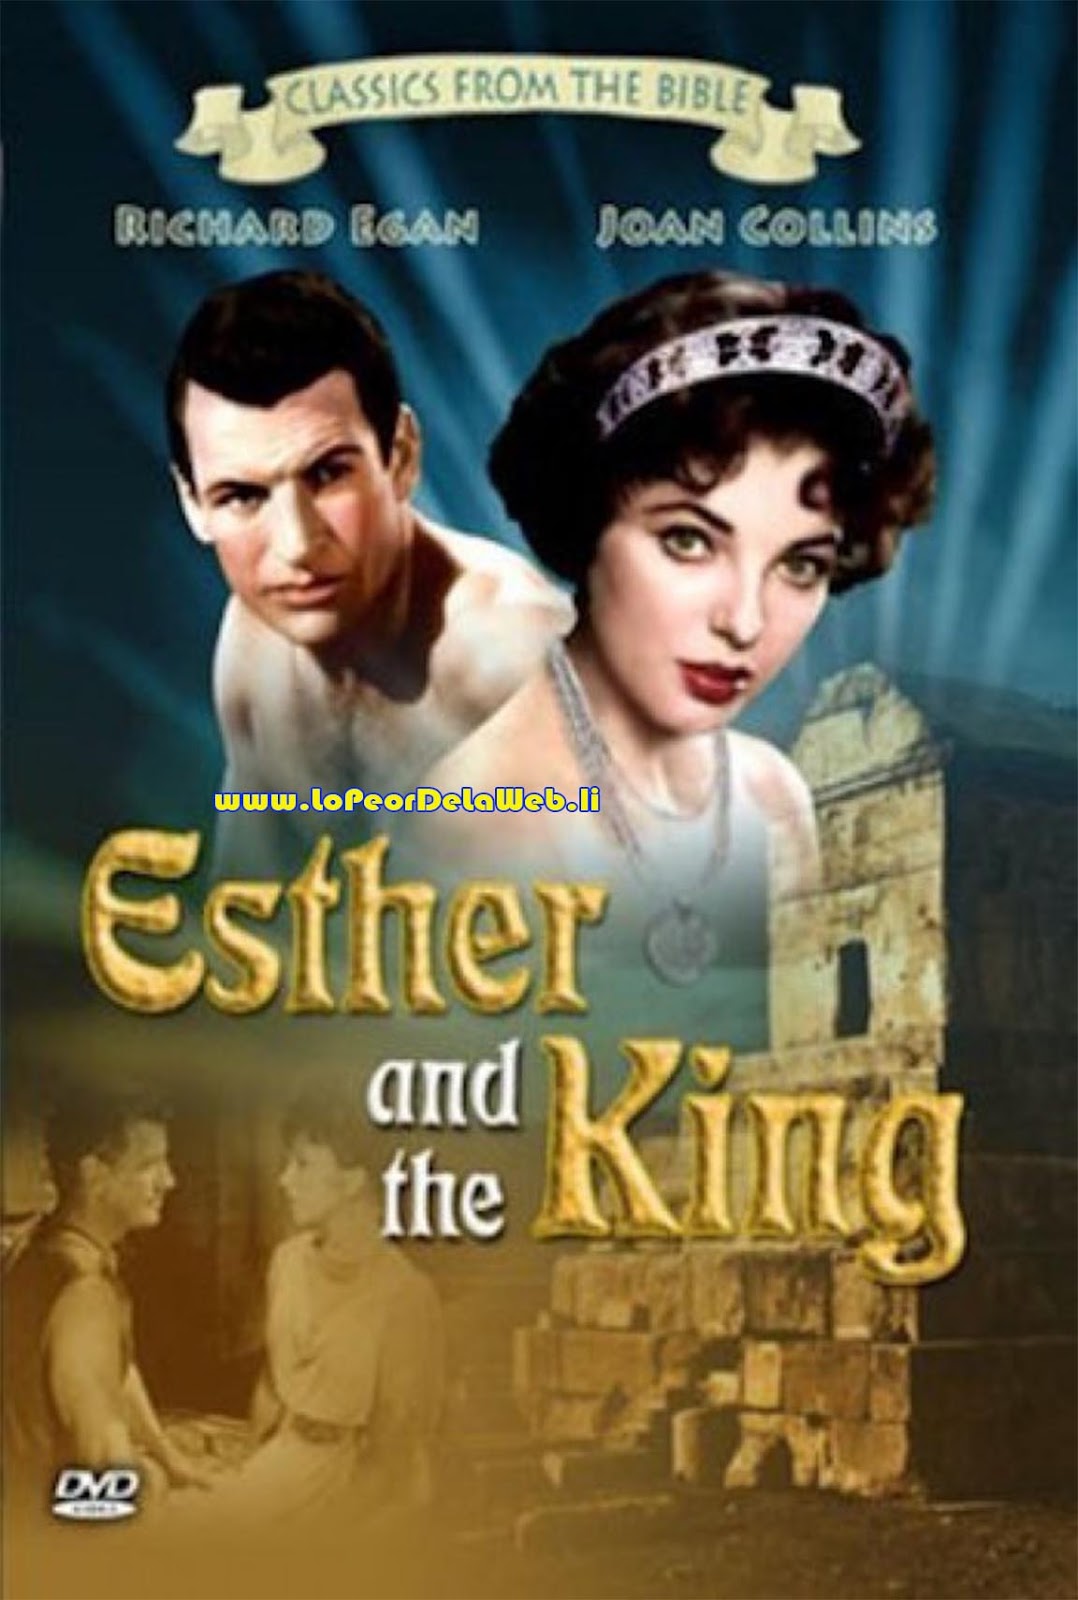 Esther and the King (1960 - Épica - Raoul Walsh)